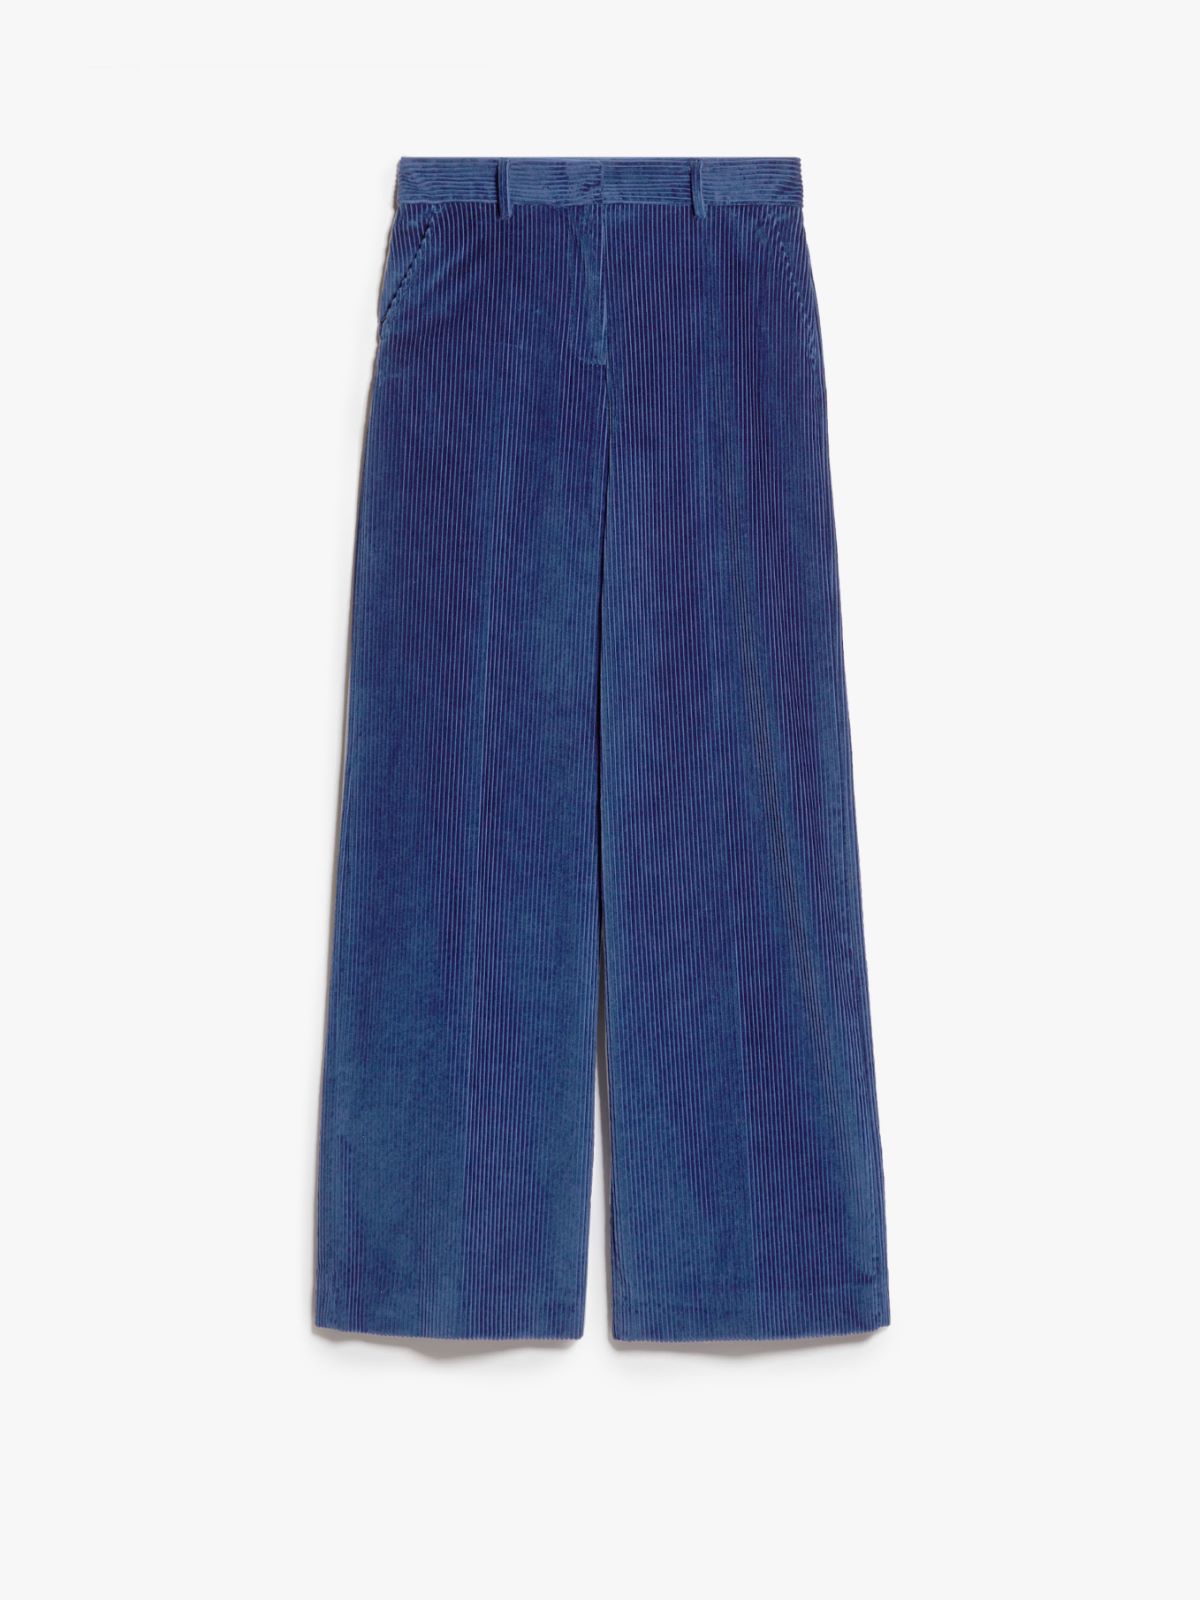 Cotton velvet trousers - CHINA BLUE - Weekend Max Mara - 5